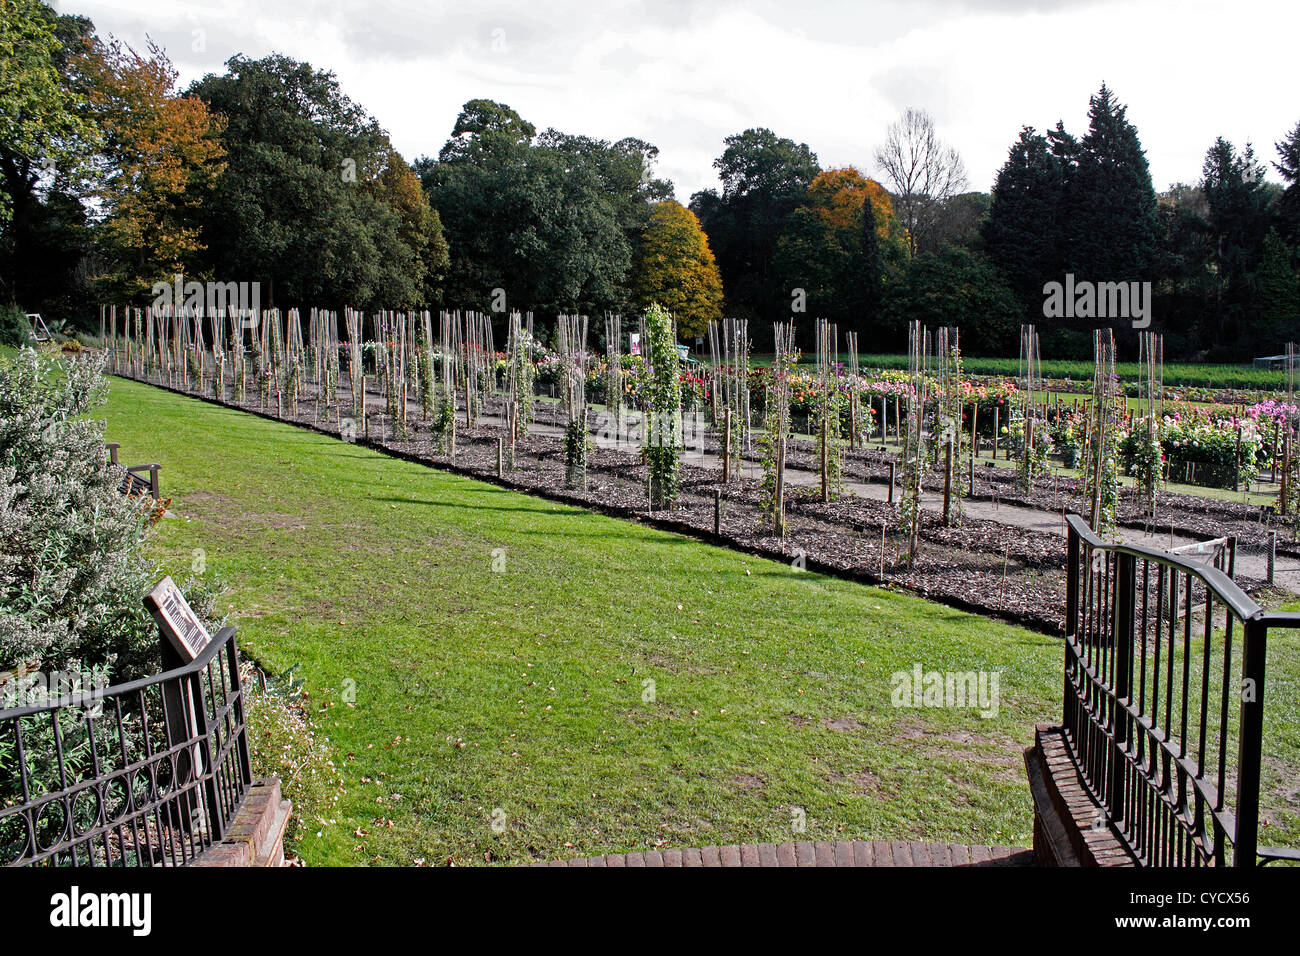 THE HORTICULTURAL TRIAL FIELDS OF RHS WISLEY. SURREY UK. Stock Photo